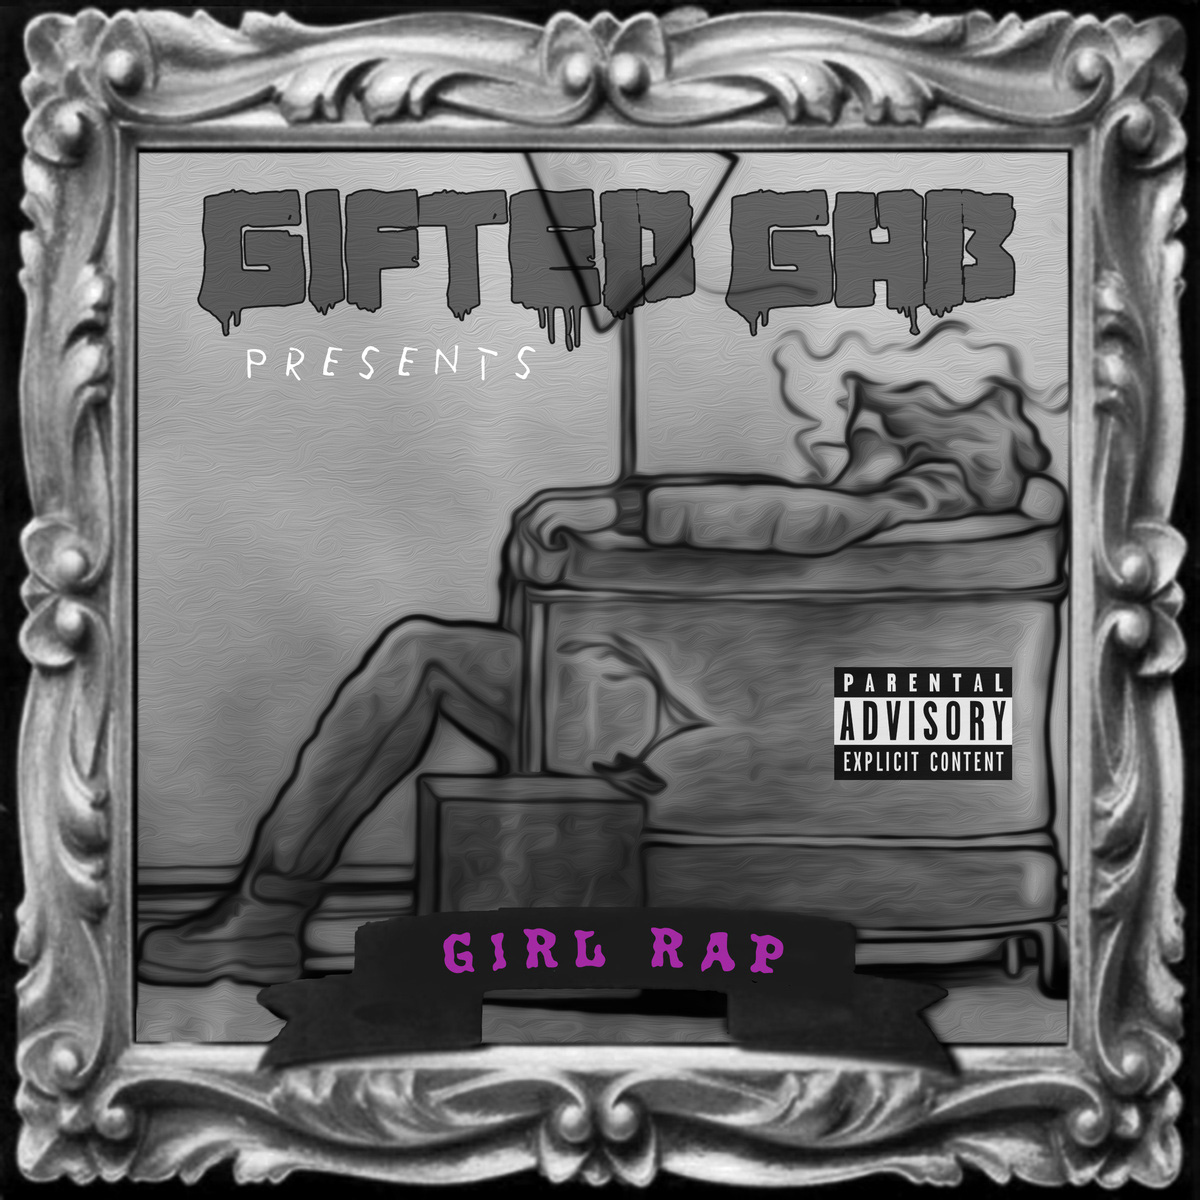 Gifted Gab, Girl Rap (out now, self-released, 1giftofgab.bandcamp.com/album/girl-rap)For all of Seattle hip-hop’s